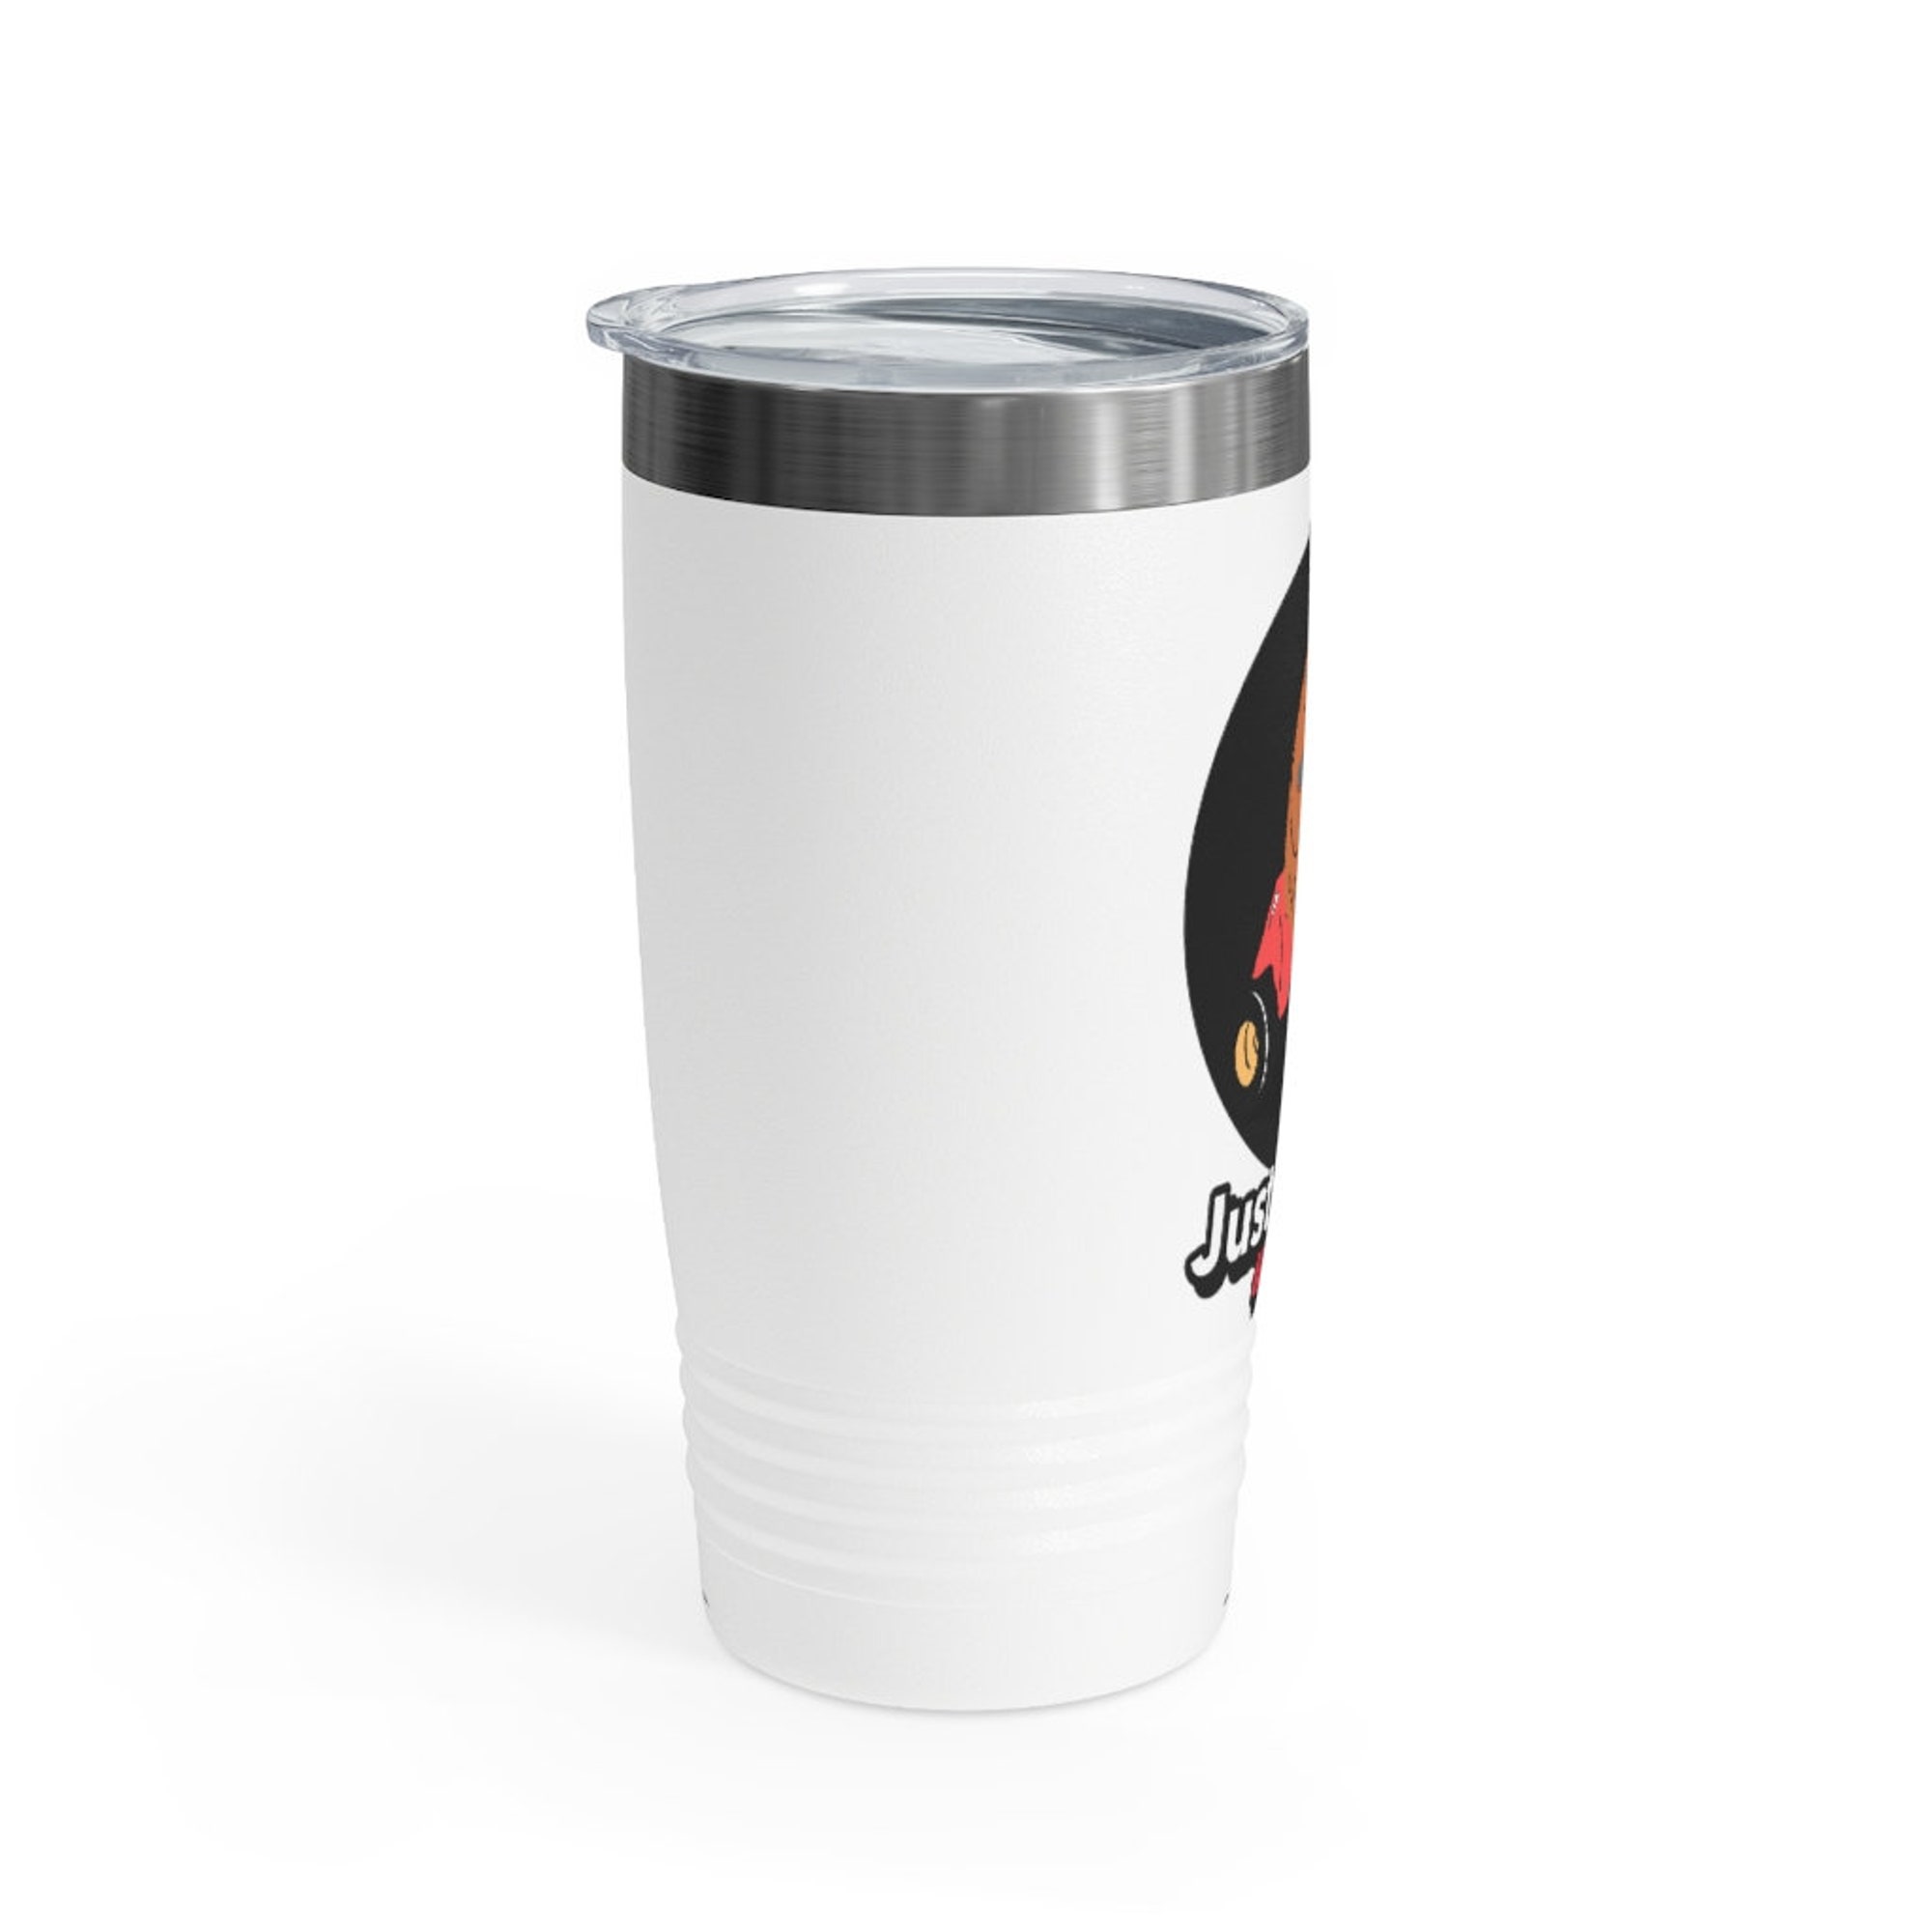 Just Rollin' with it Ringneck Tumbler, 20oz